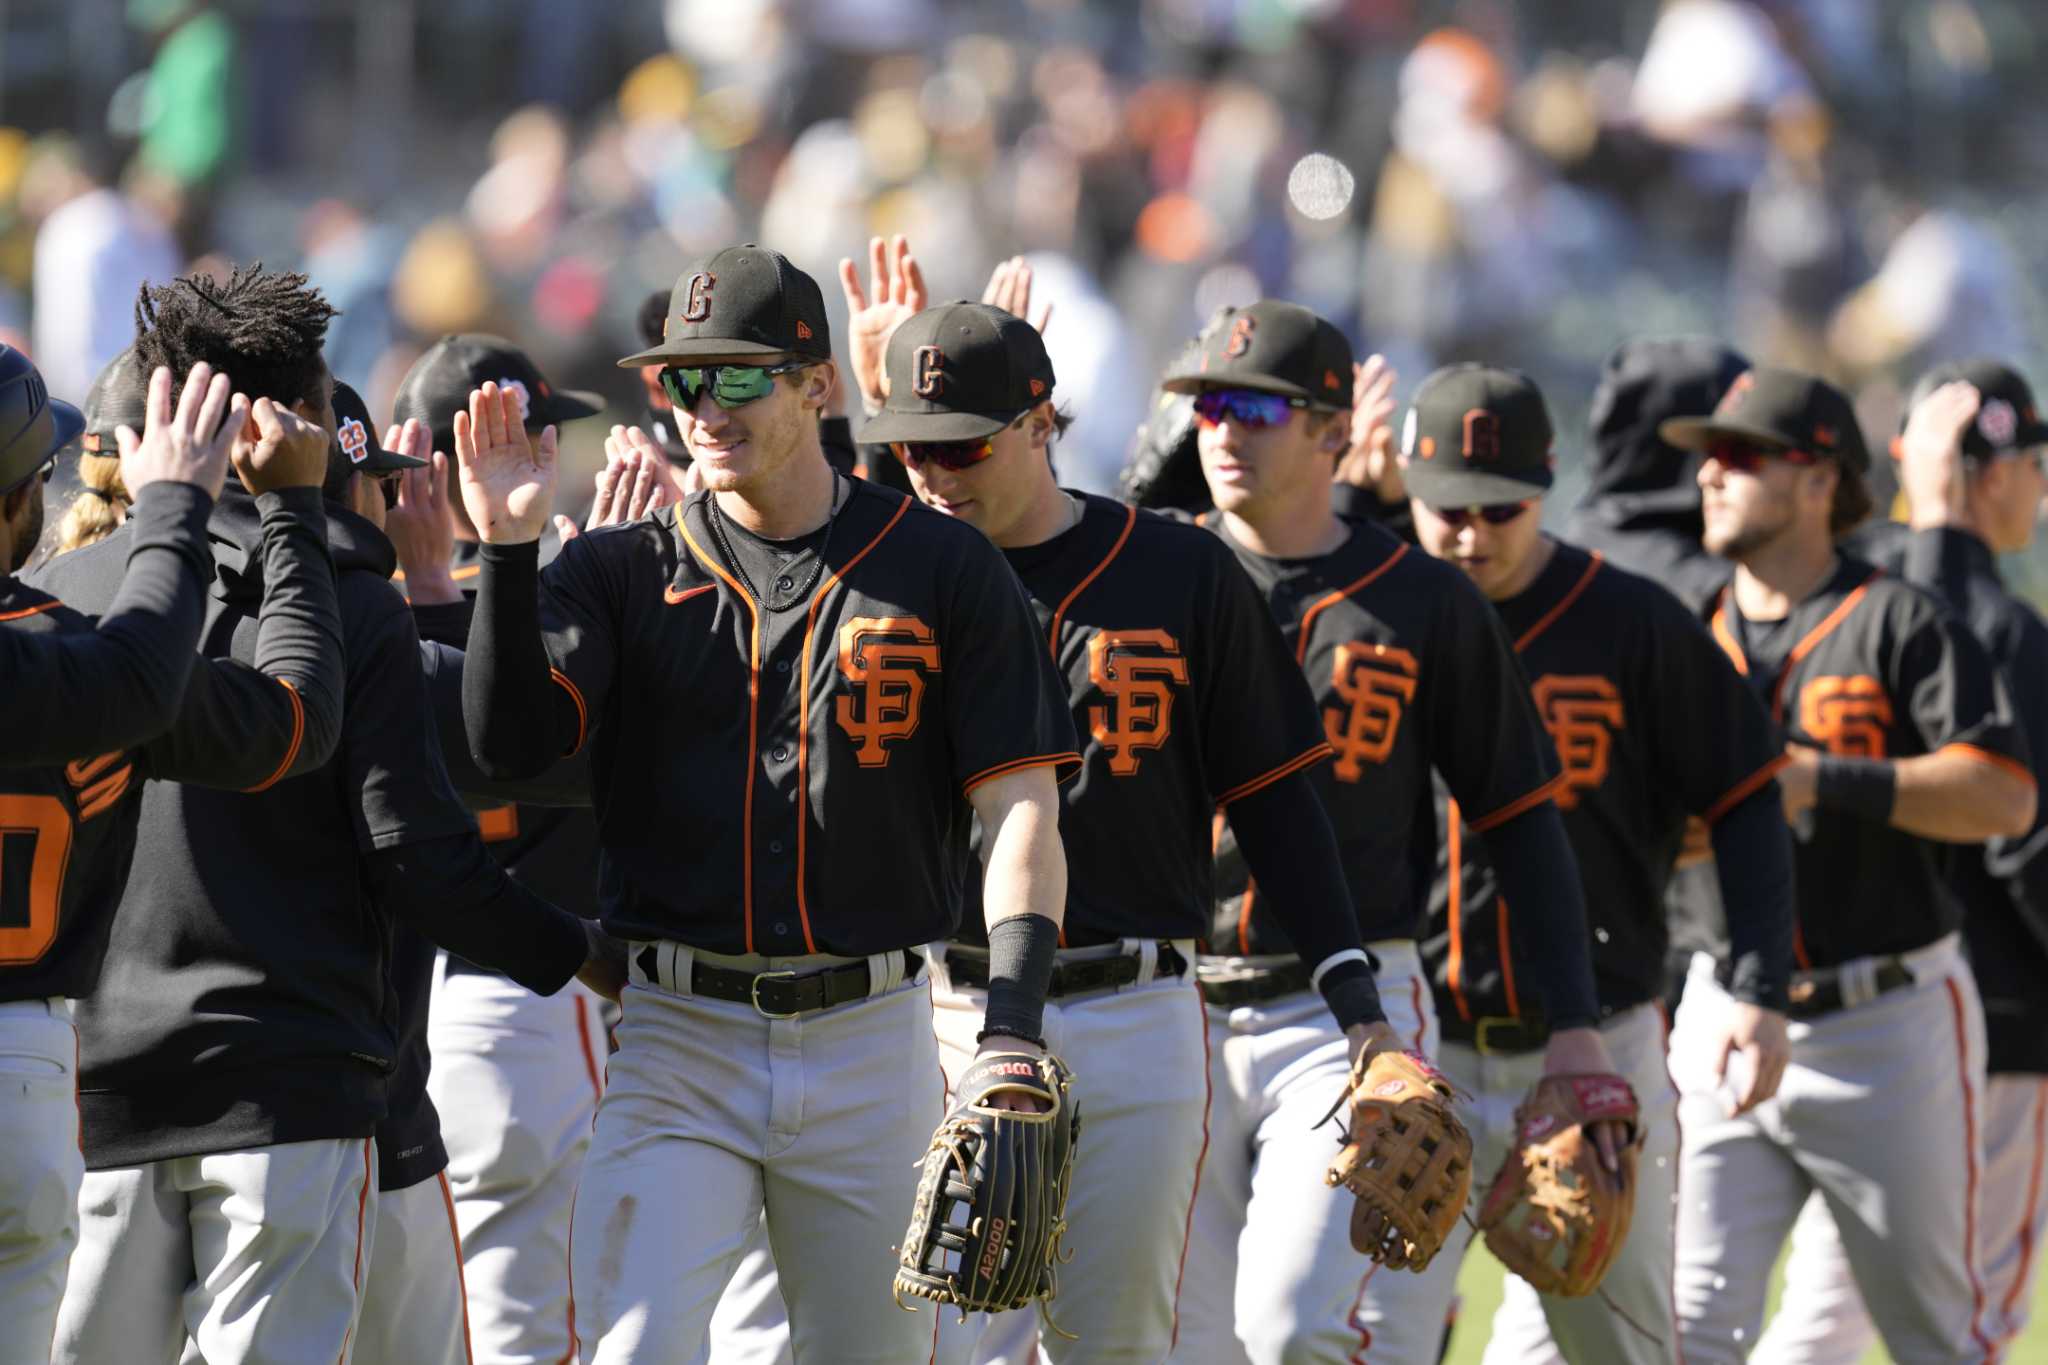 2023 Giants, A's fall short of Bay Area baseball's legacy of greatness